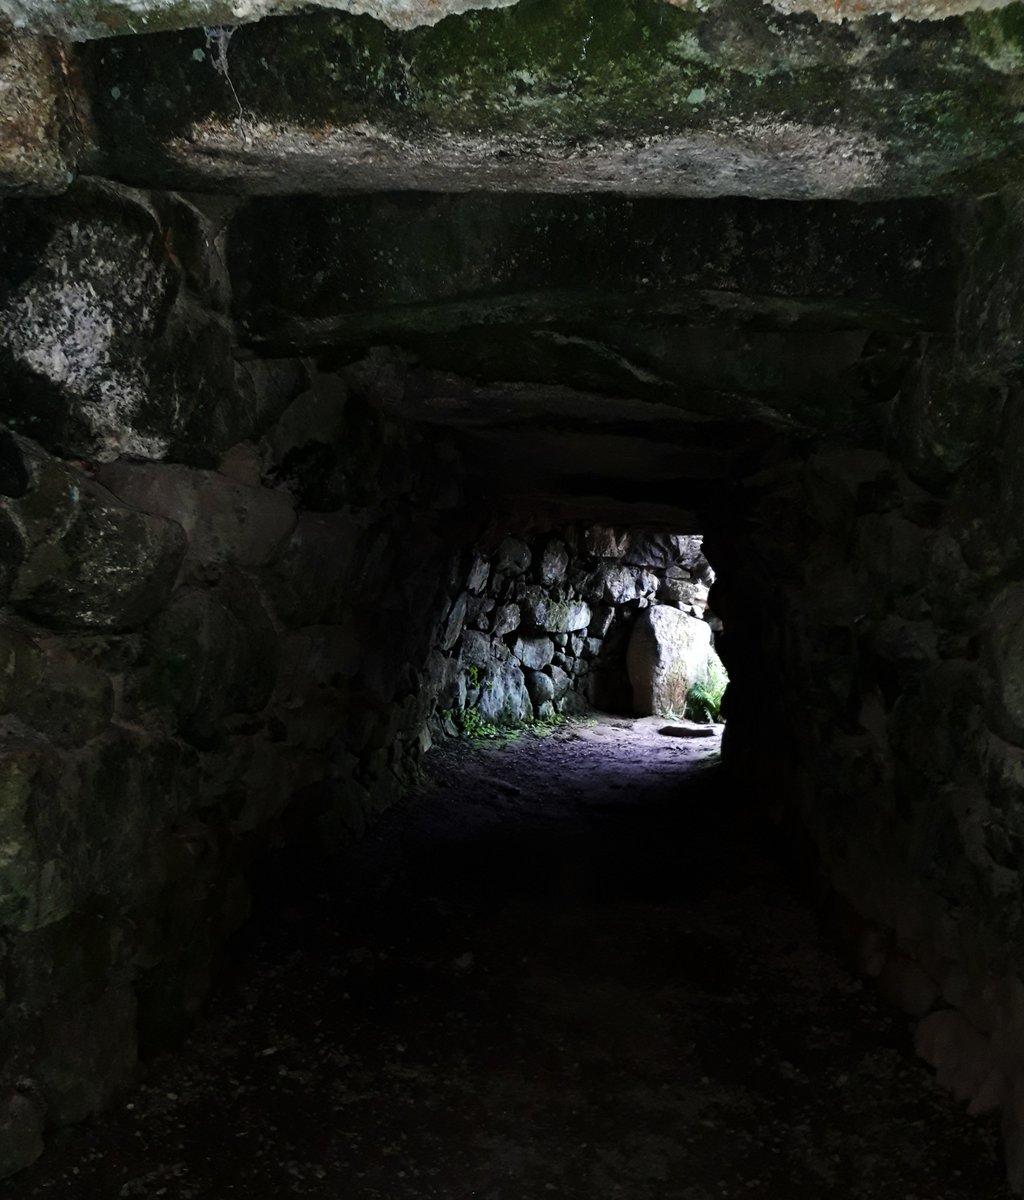 No-one's really sure why these remarkably well-engineered tunnels crop up at a few of our ancient sites. Shelter? Food storage? Ritual/religious reasons? The Carn Euny fogou has an impressive domed ante-chamber as well as a curved underground passageway. #PrehistoryOfPenwith